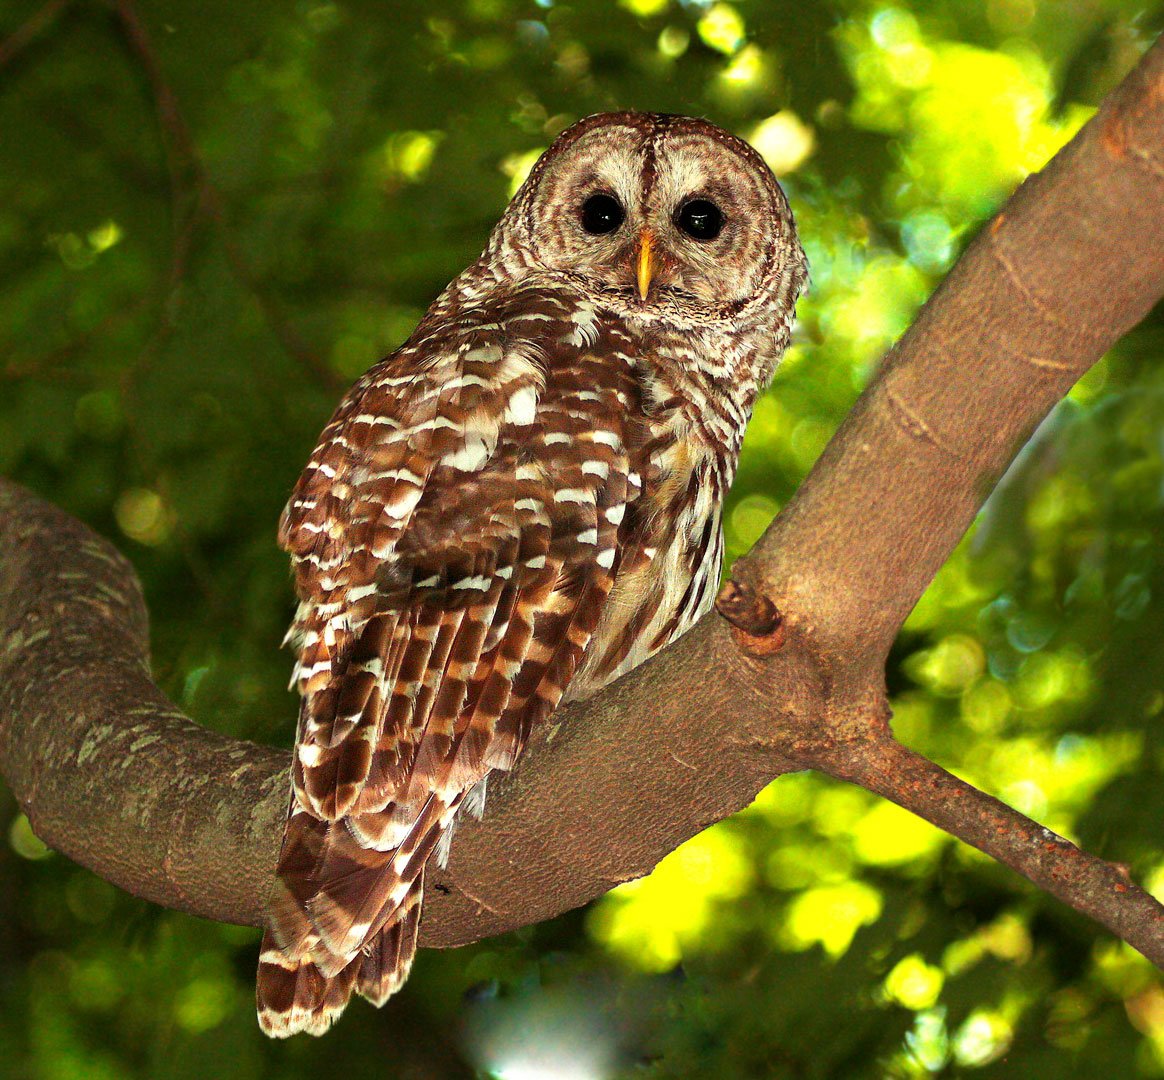 Barred owl at Inniswood